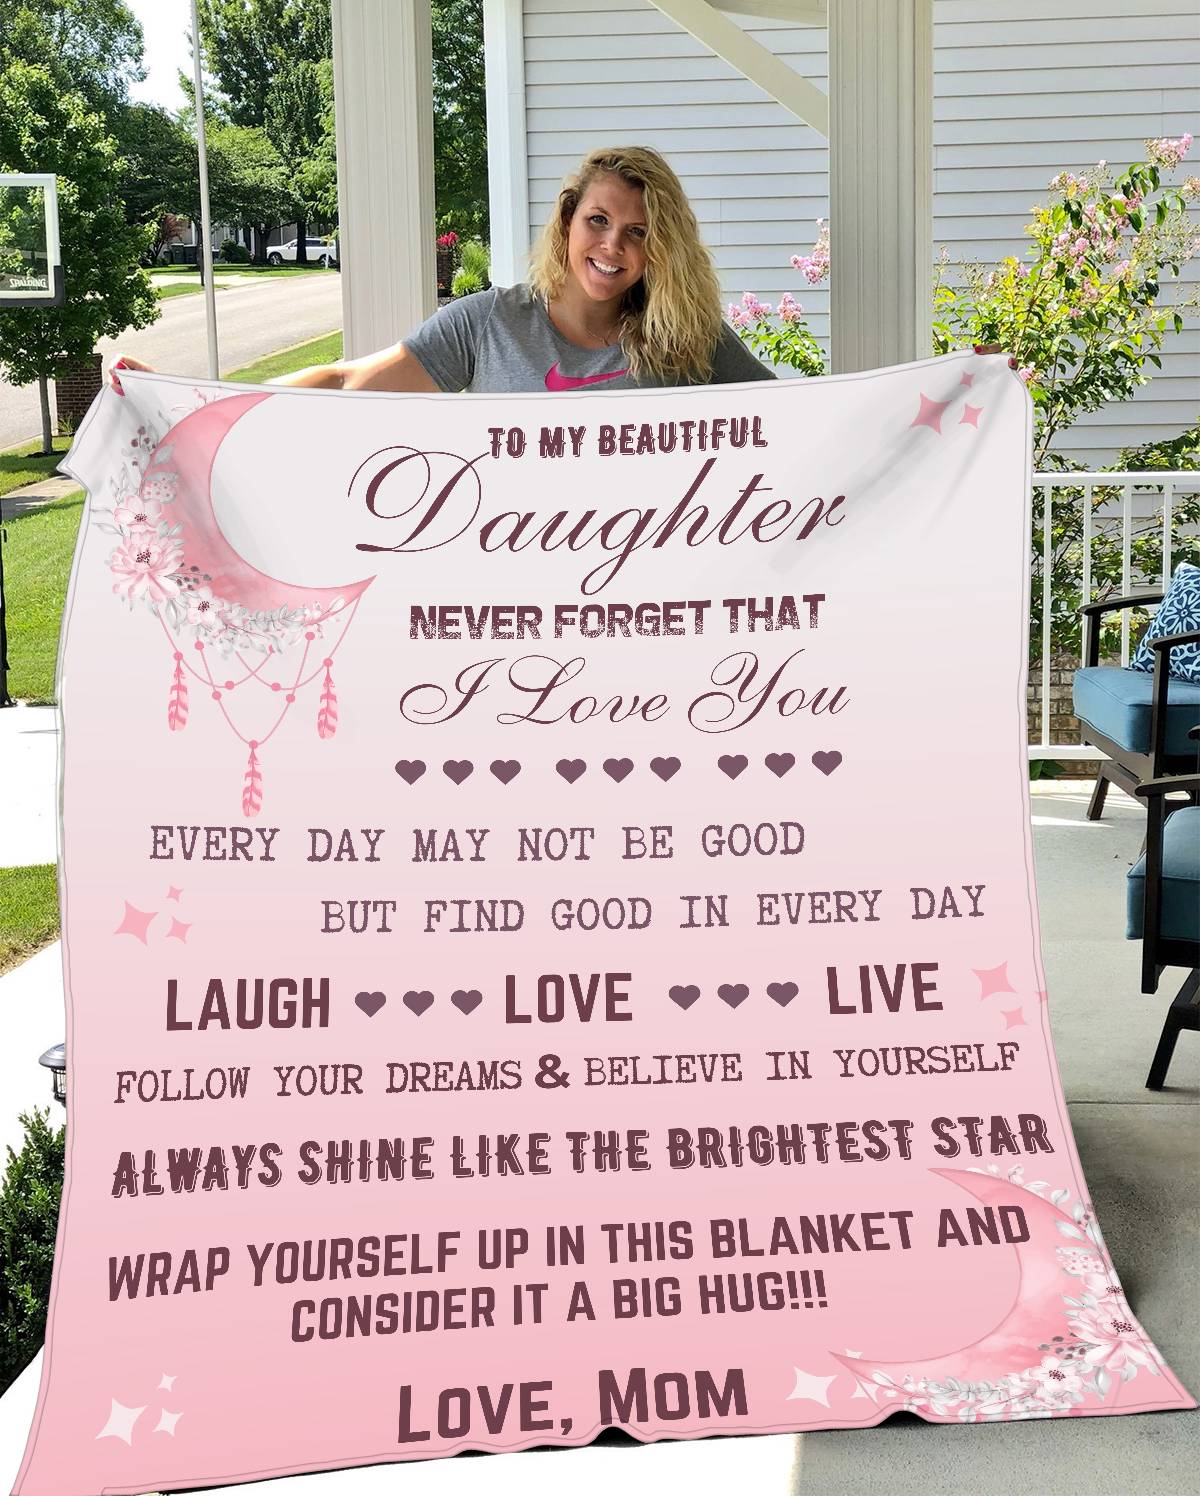 Brightest Star- Mom to Daughter Blanket